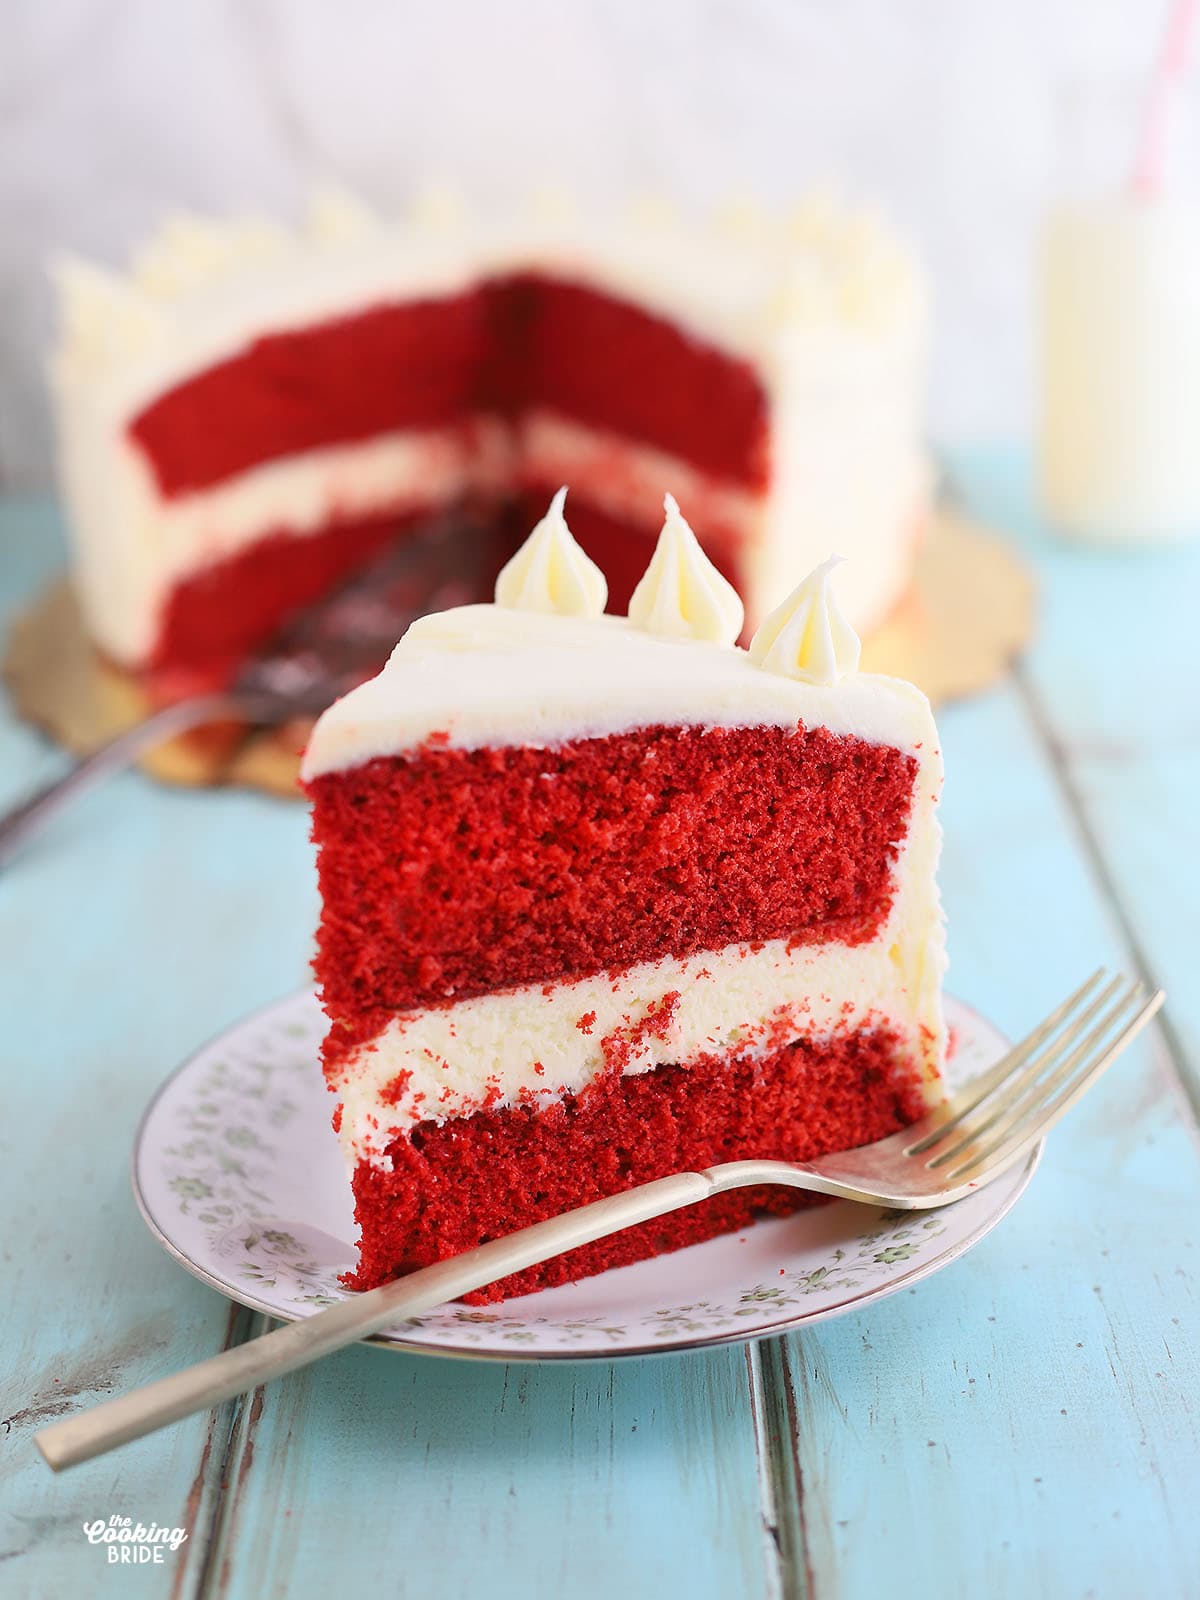 single slice of red velvet cake on a plate with a fork, cut cake in the background